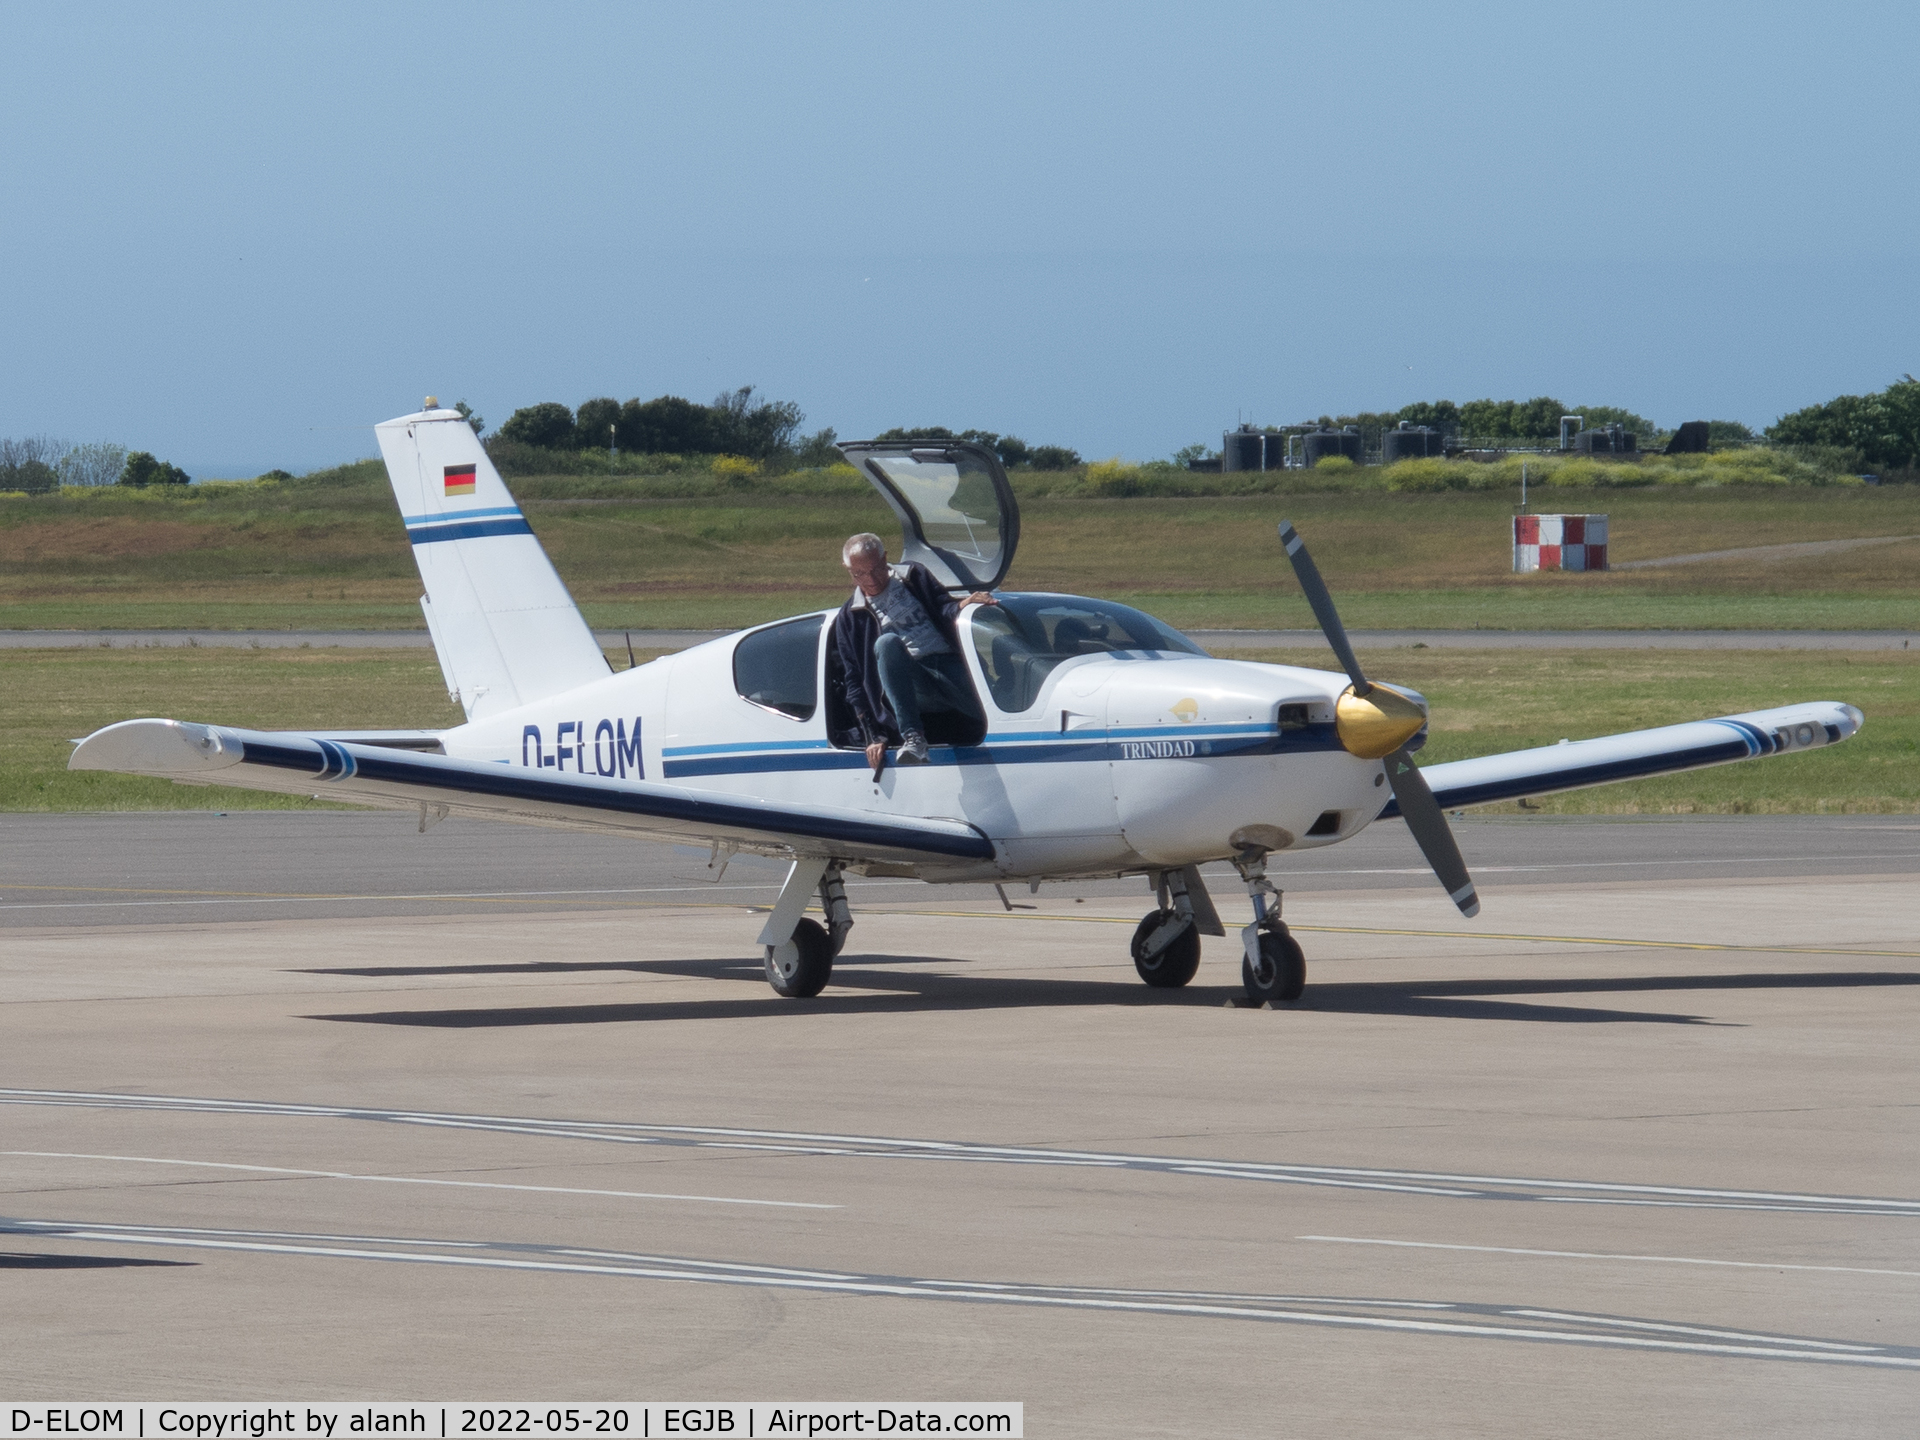 D-ELOM, 1989 Socata TB-20 Trinidad C/N 873, Arrived in Guernsey on tour after a flight from Jersey